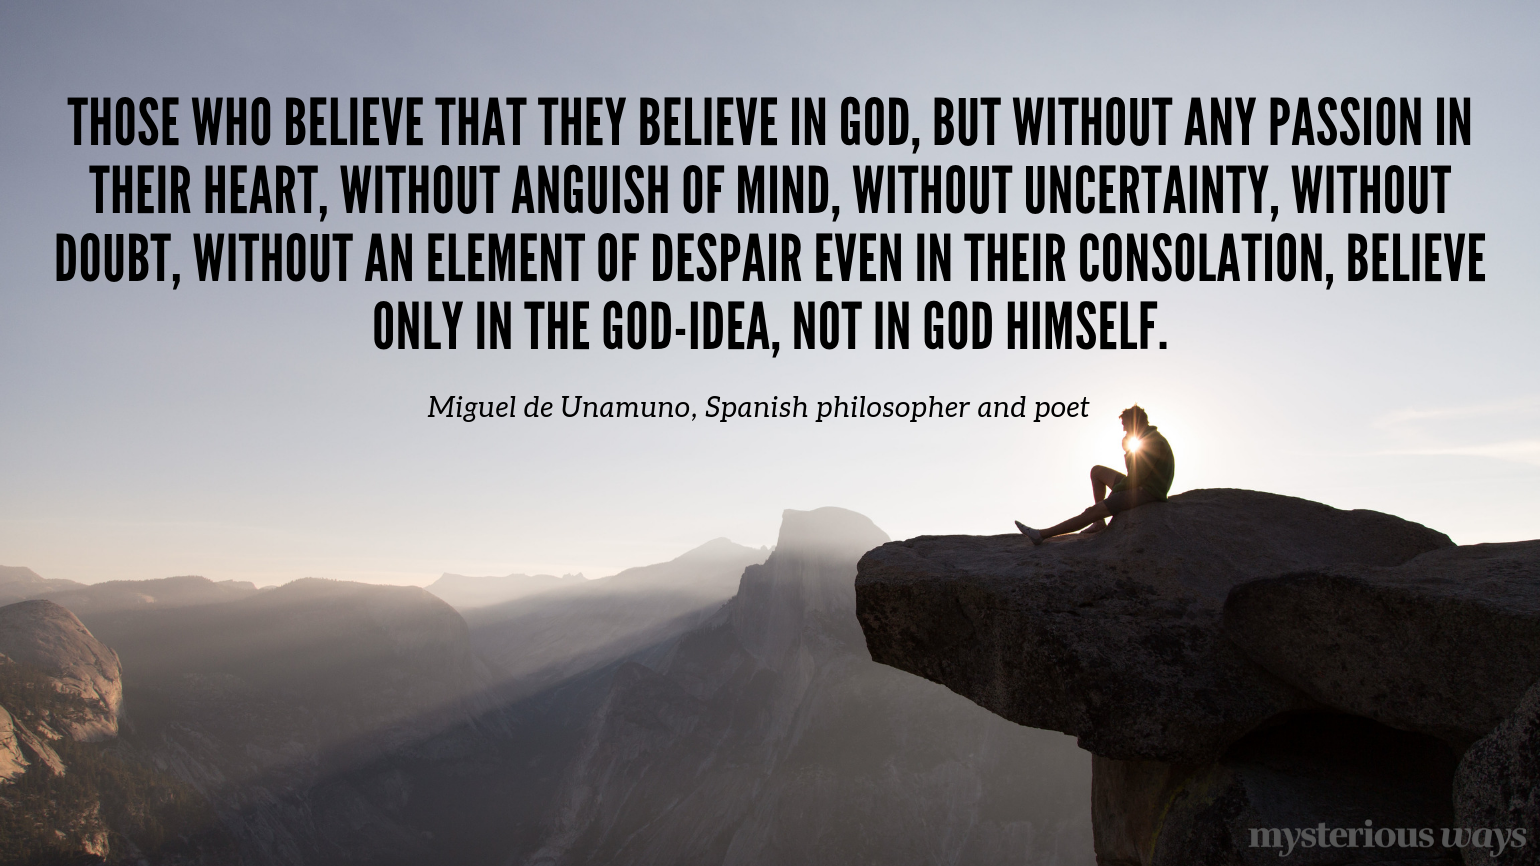 “Those who believe that they believe in God, but without any passion in their heart, without anguish of mind, without uncertainty, without doubt, without an element of despair even in their consolation, believe only in the God-Idea, not in God himself.”